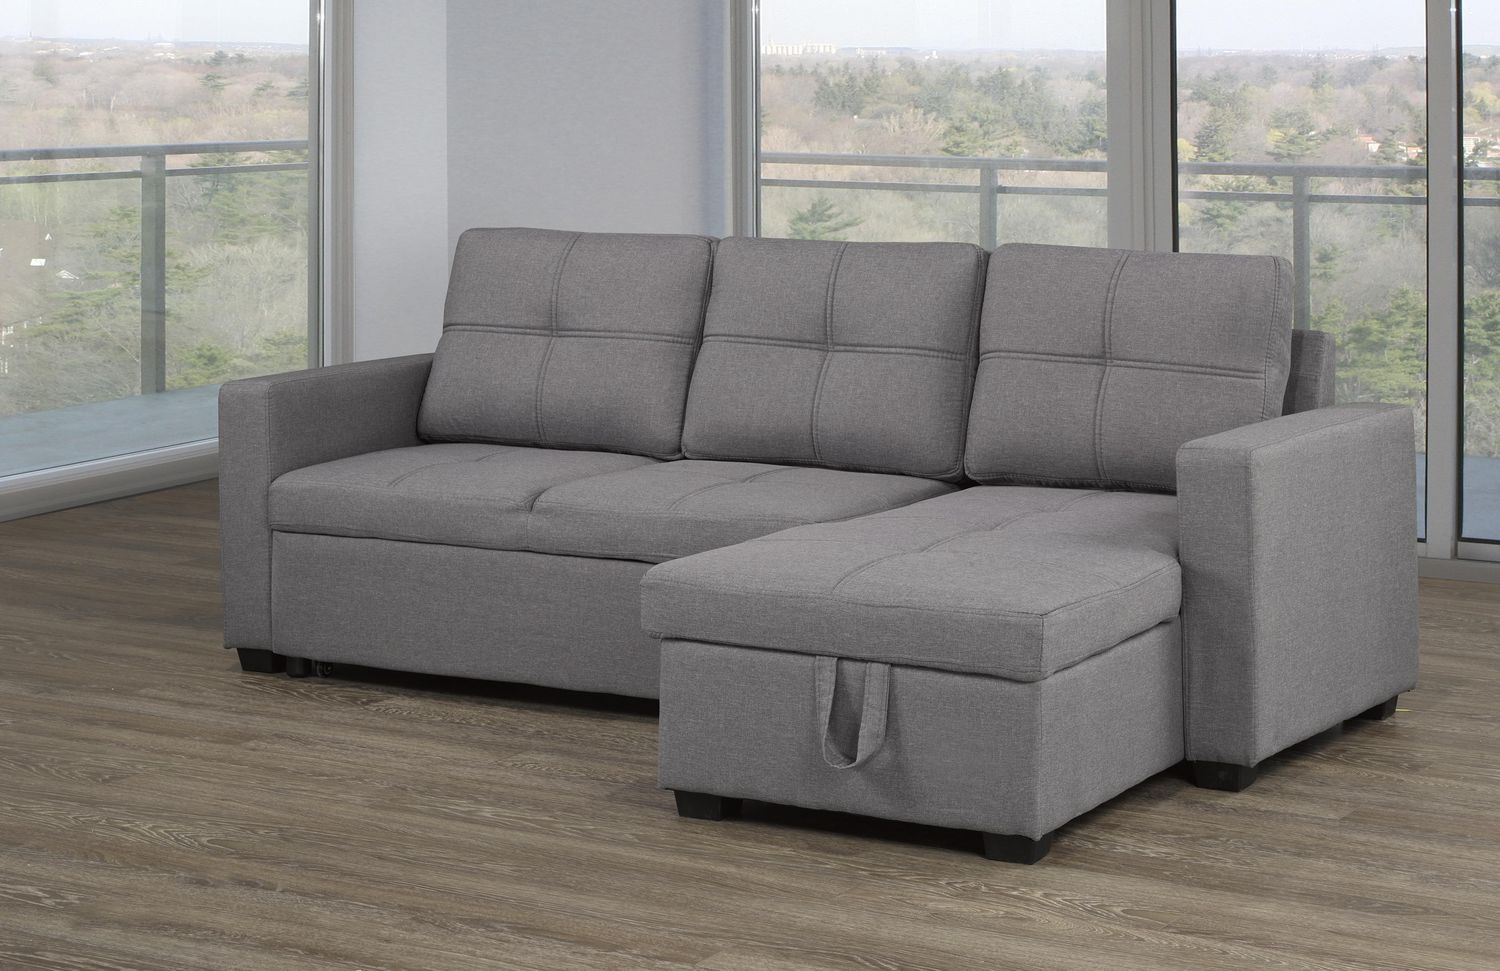 Sectional With Pull Out Bed & Storage Chaise, Grey | Walmart Canada Regarding 2 In 1 Gray Pull Out Sofa Beds (Gallery 20 of 20)